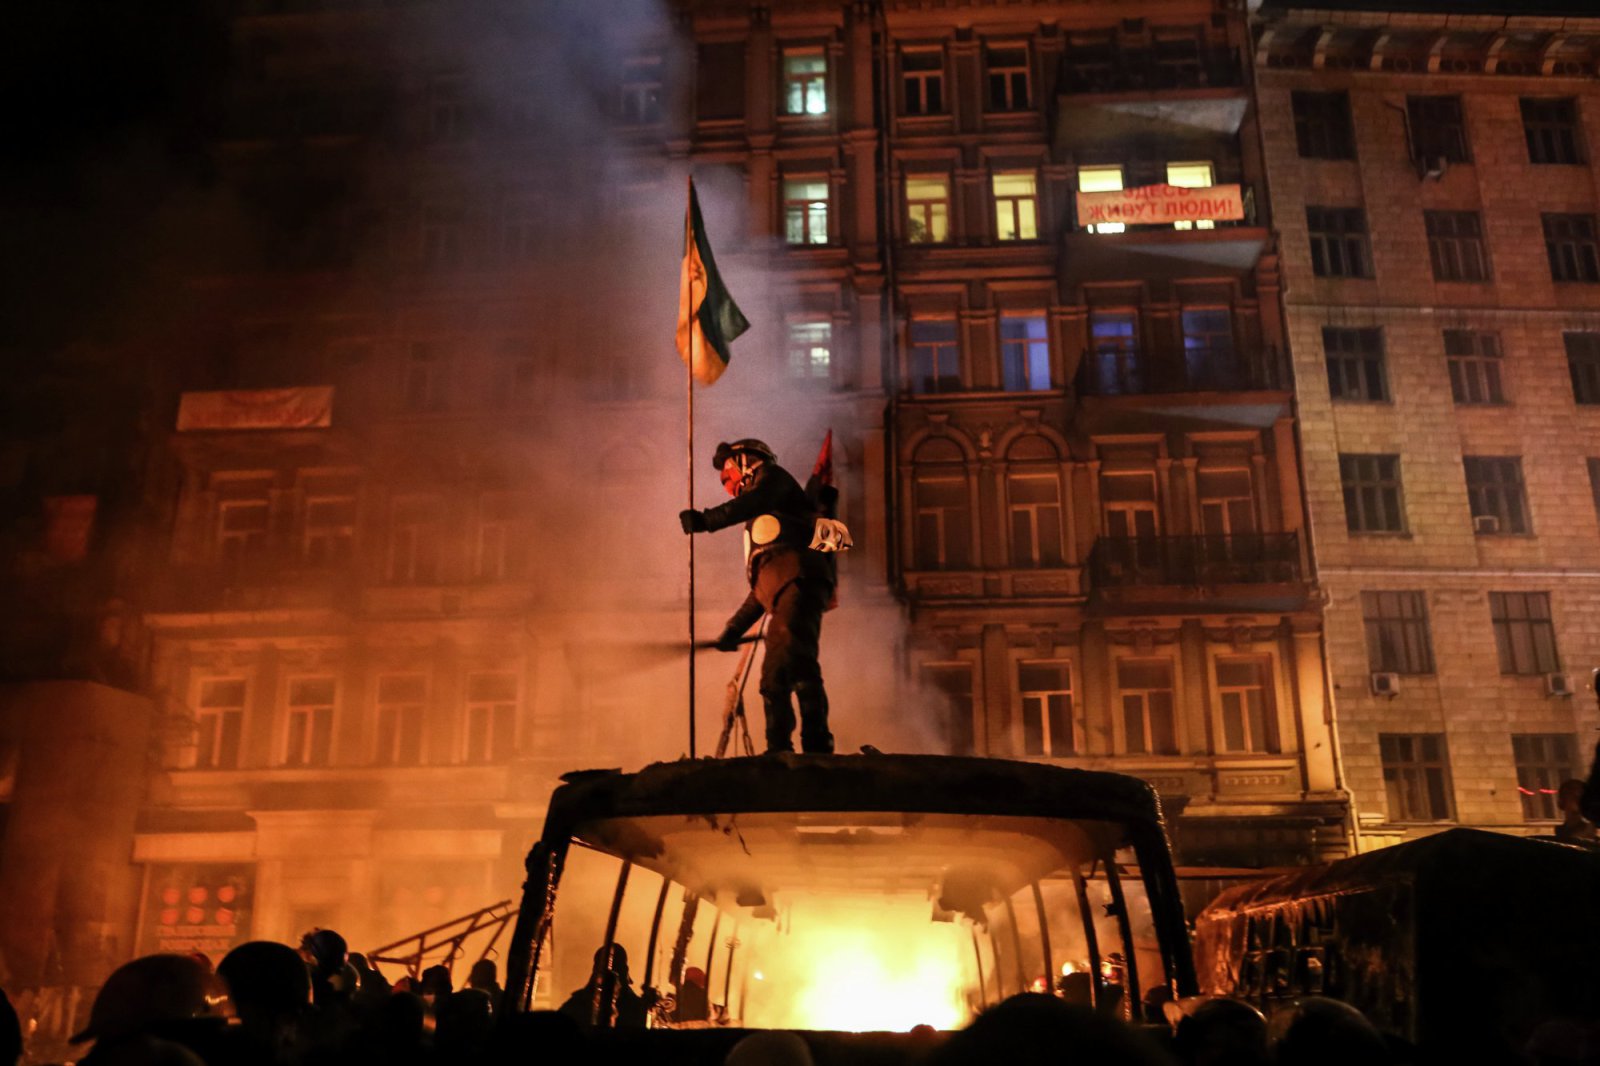 Anti-government protests in Kiev January 25, 2014. After two months of primarily peaceful anti-government protests in the city center, new laws meant to end the protest movement have sparked violent clashes in recent days. Deadly violence erupted on both sides.